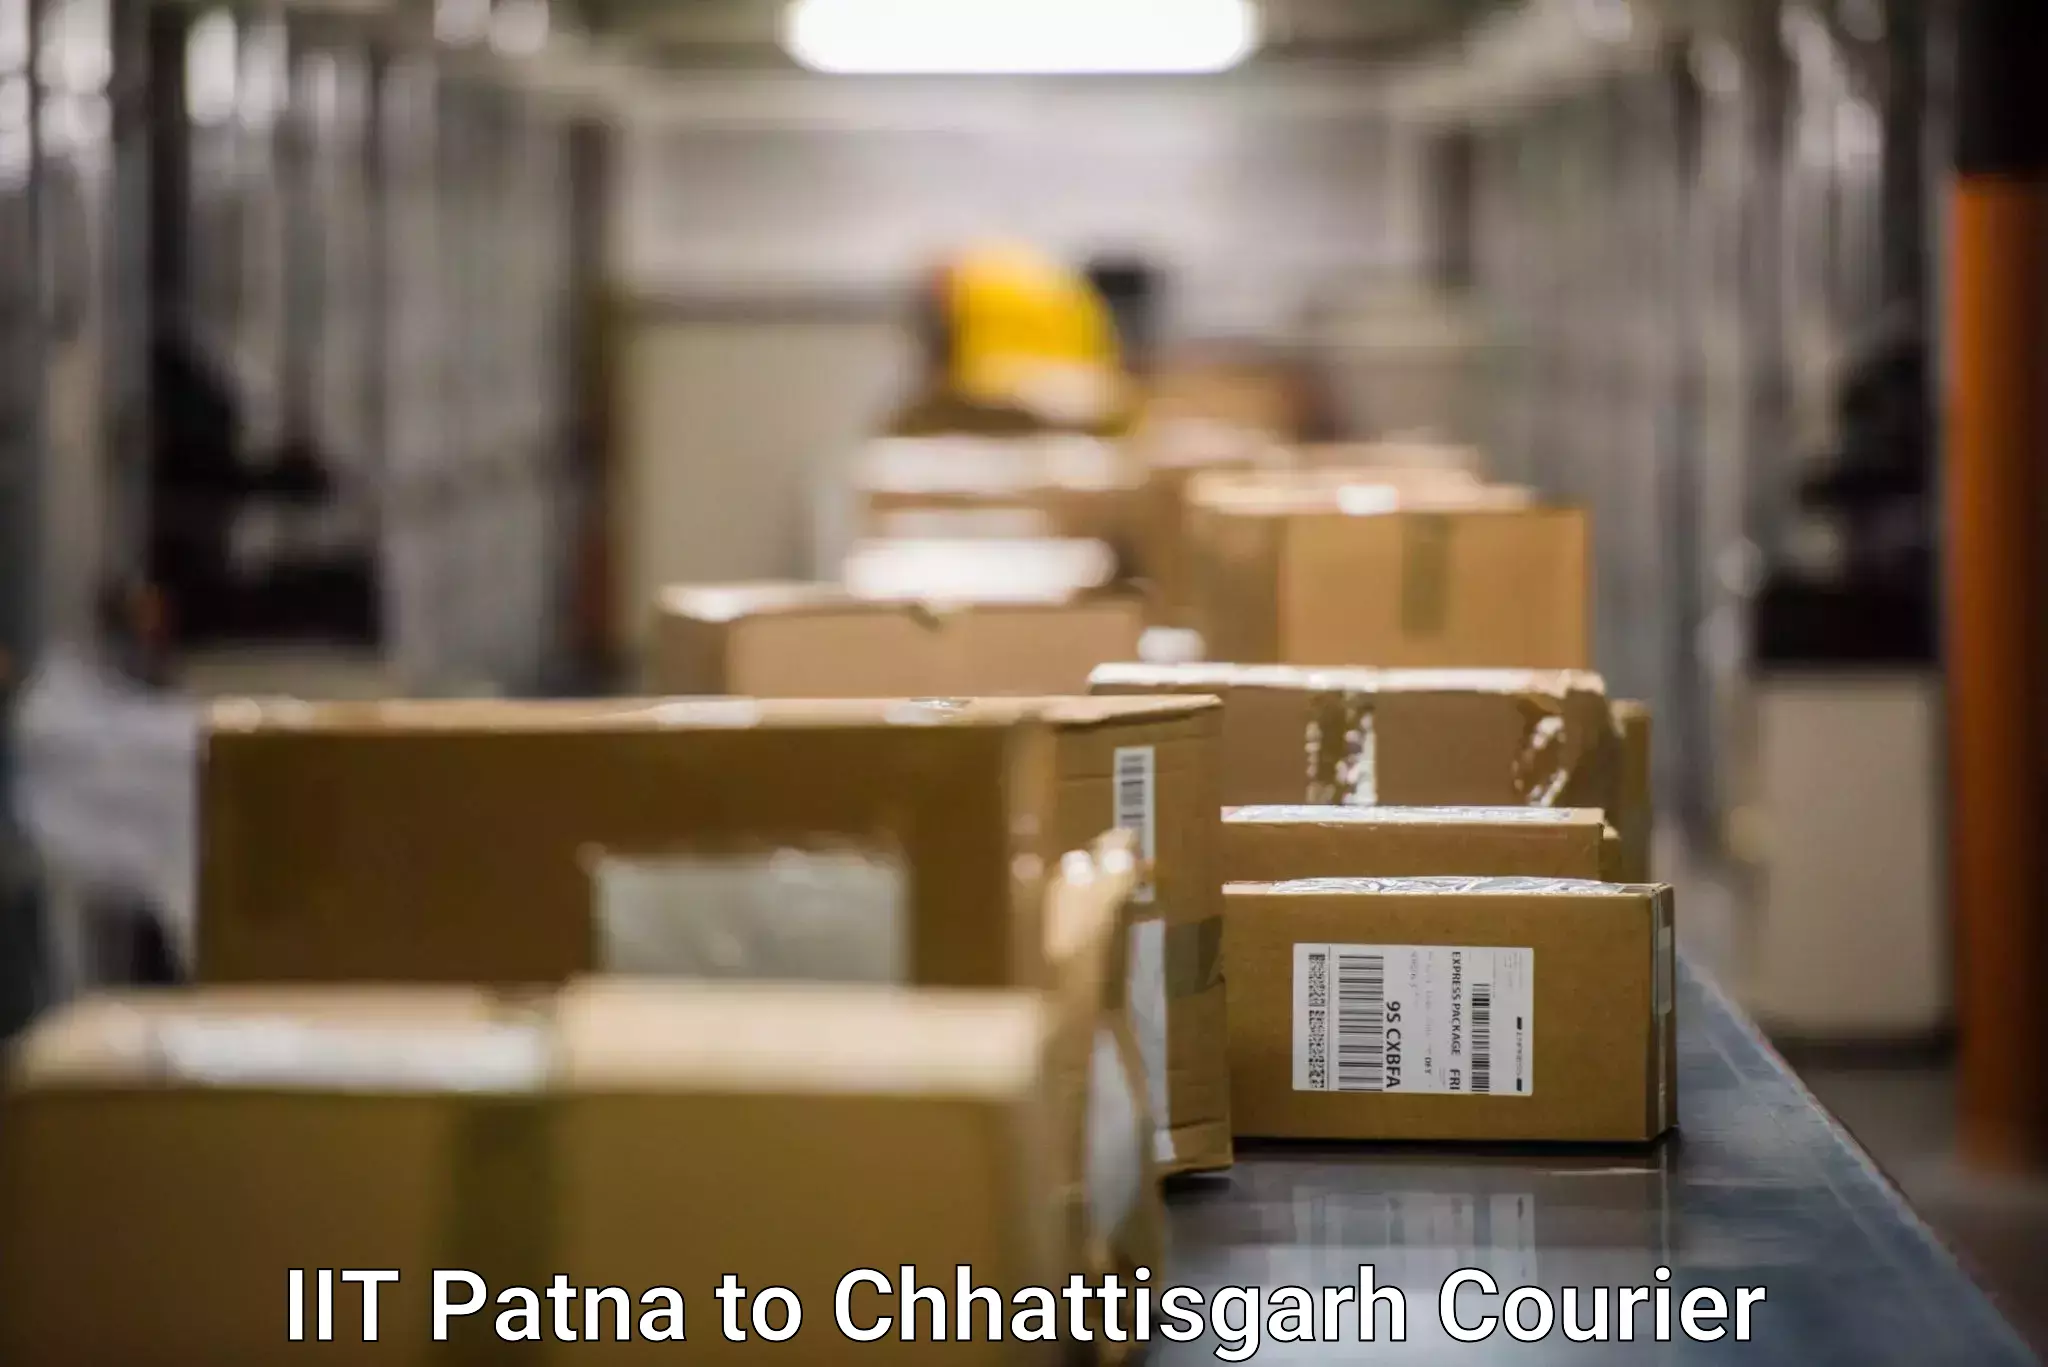 Global delivery options IIT Patna to Bhatapara